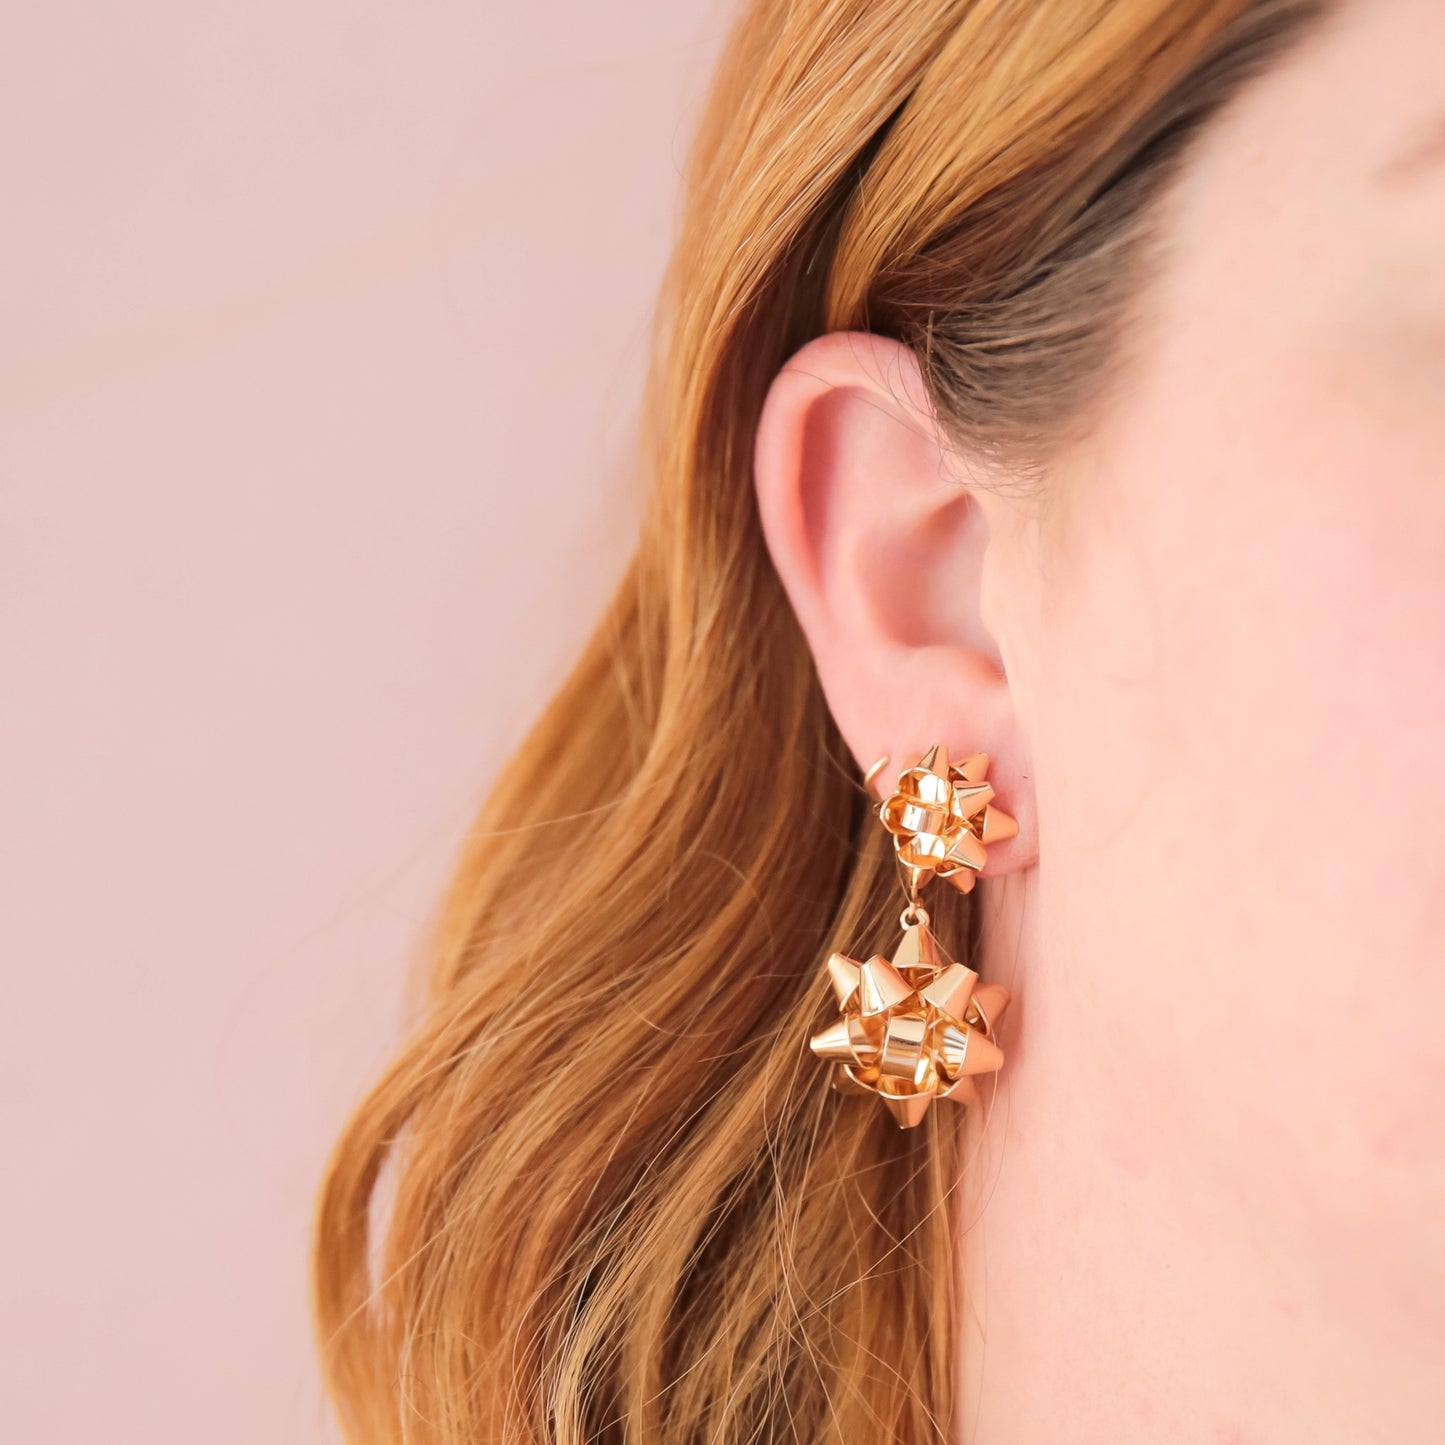 On a peachy background is a model wearing the gold double bow holiday earrings.